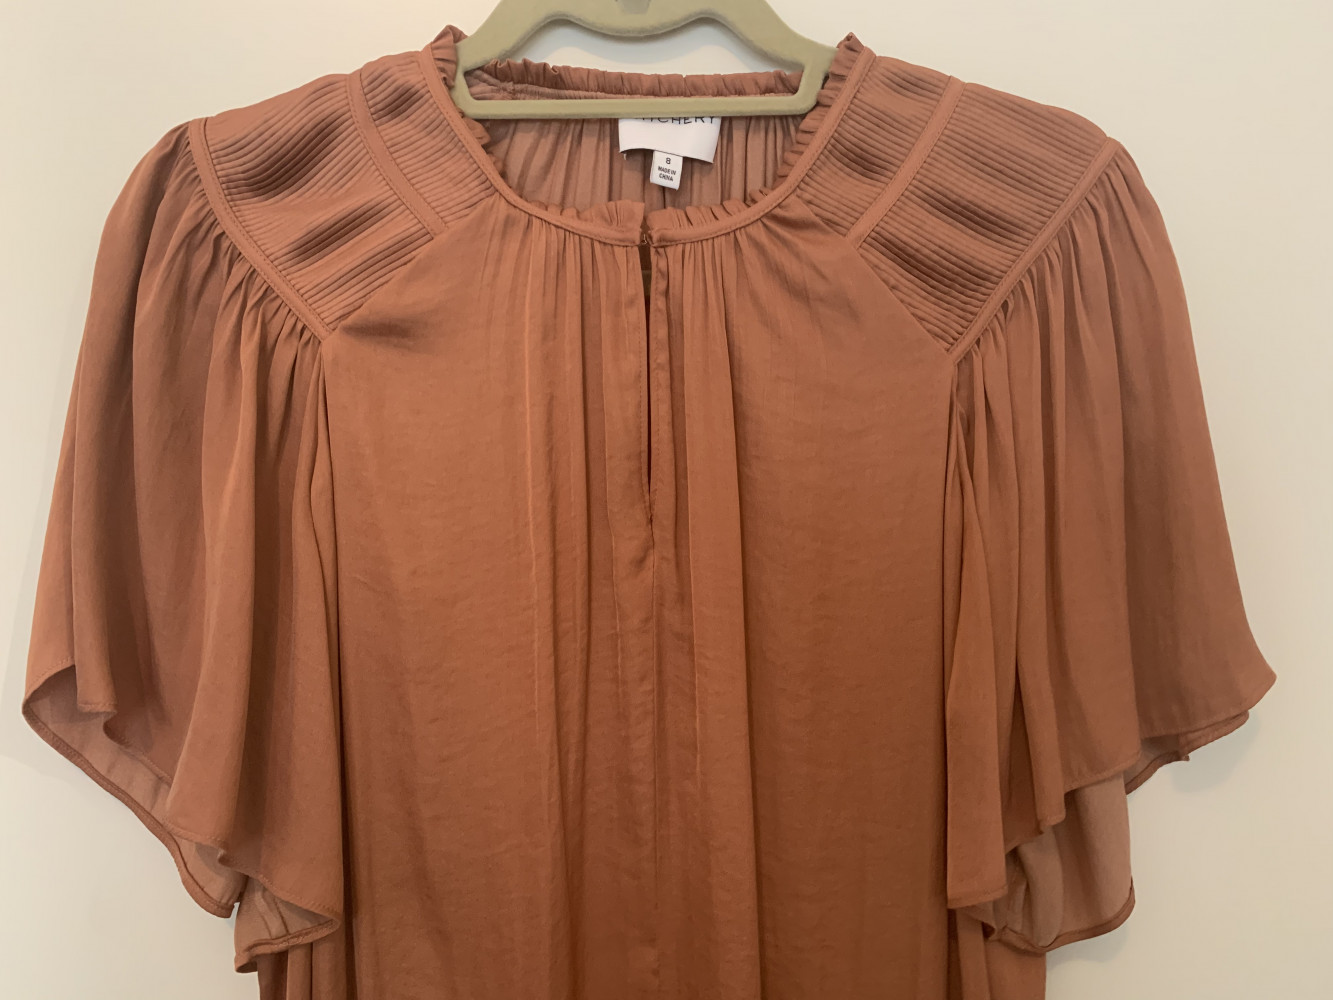 Witchery Blouse -size 8 worn only once